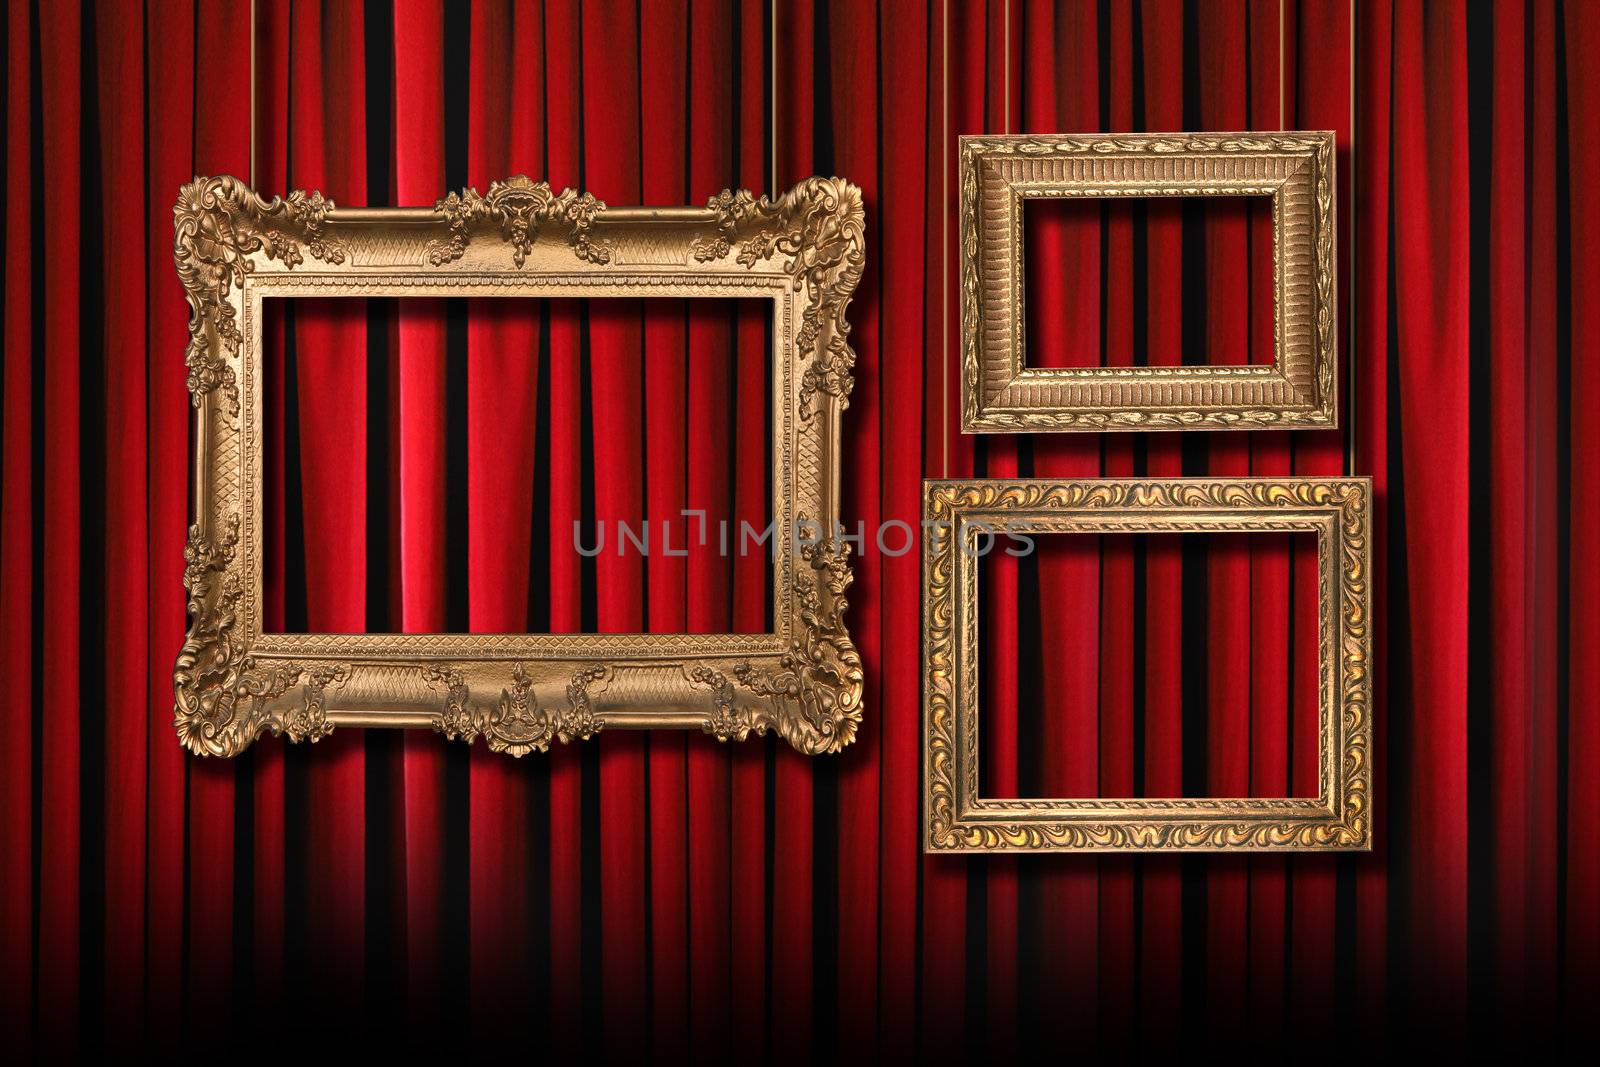 Red Stage Theater Curtains With 3 Hanging Gold Frames